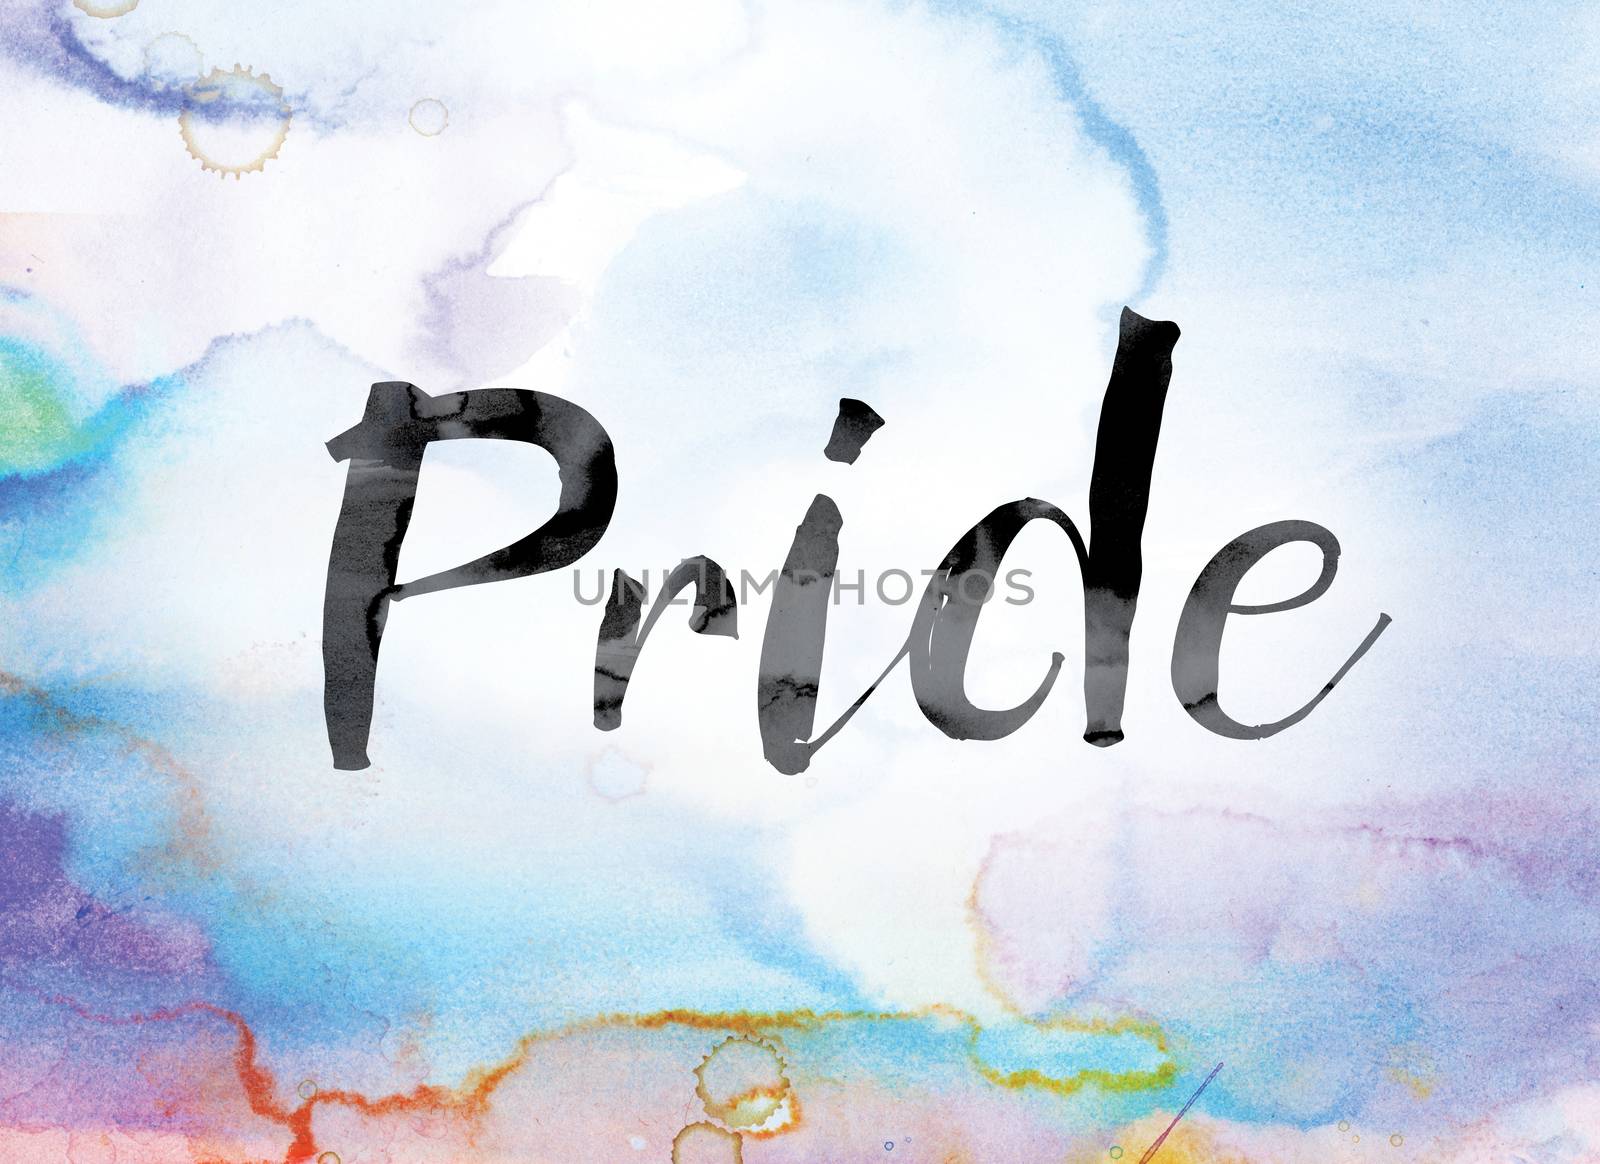 The word "Pride" painted in black ink over a colorful watercolor washed background concept and theme.